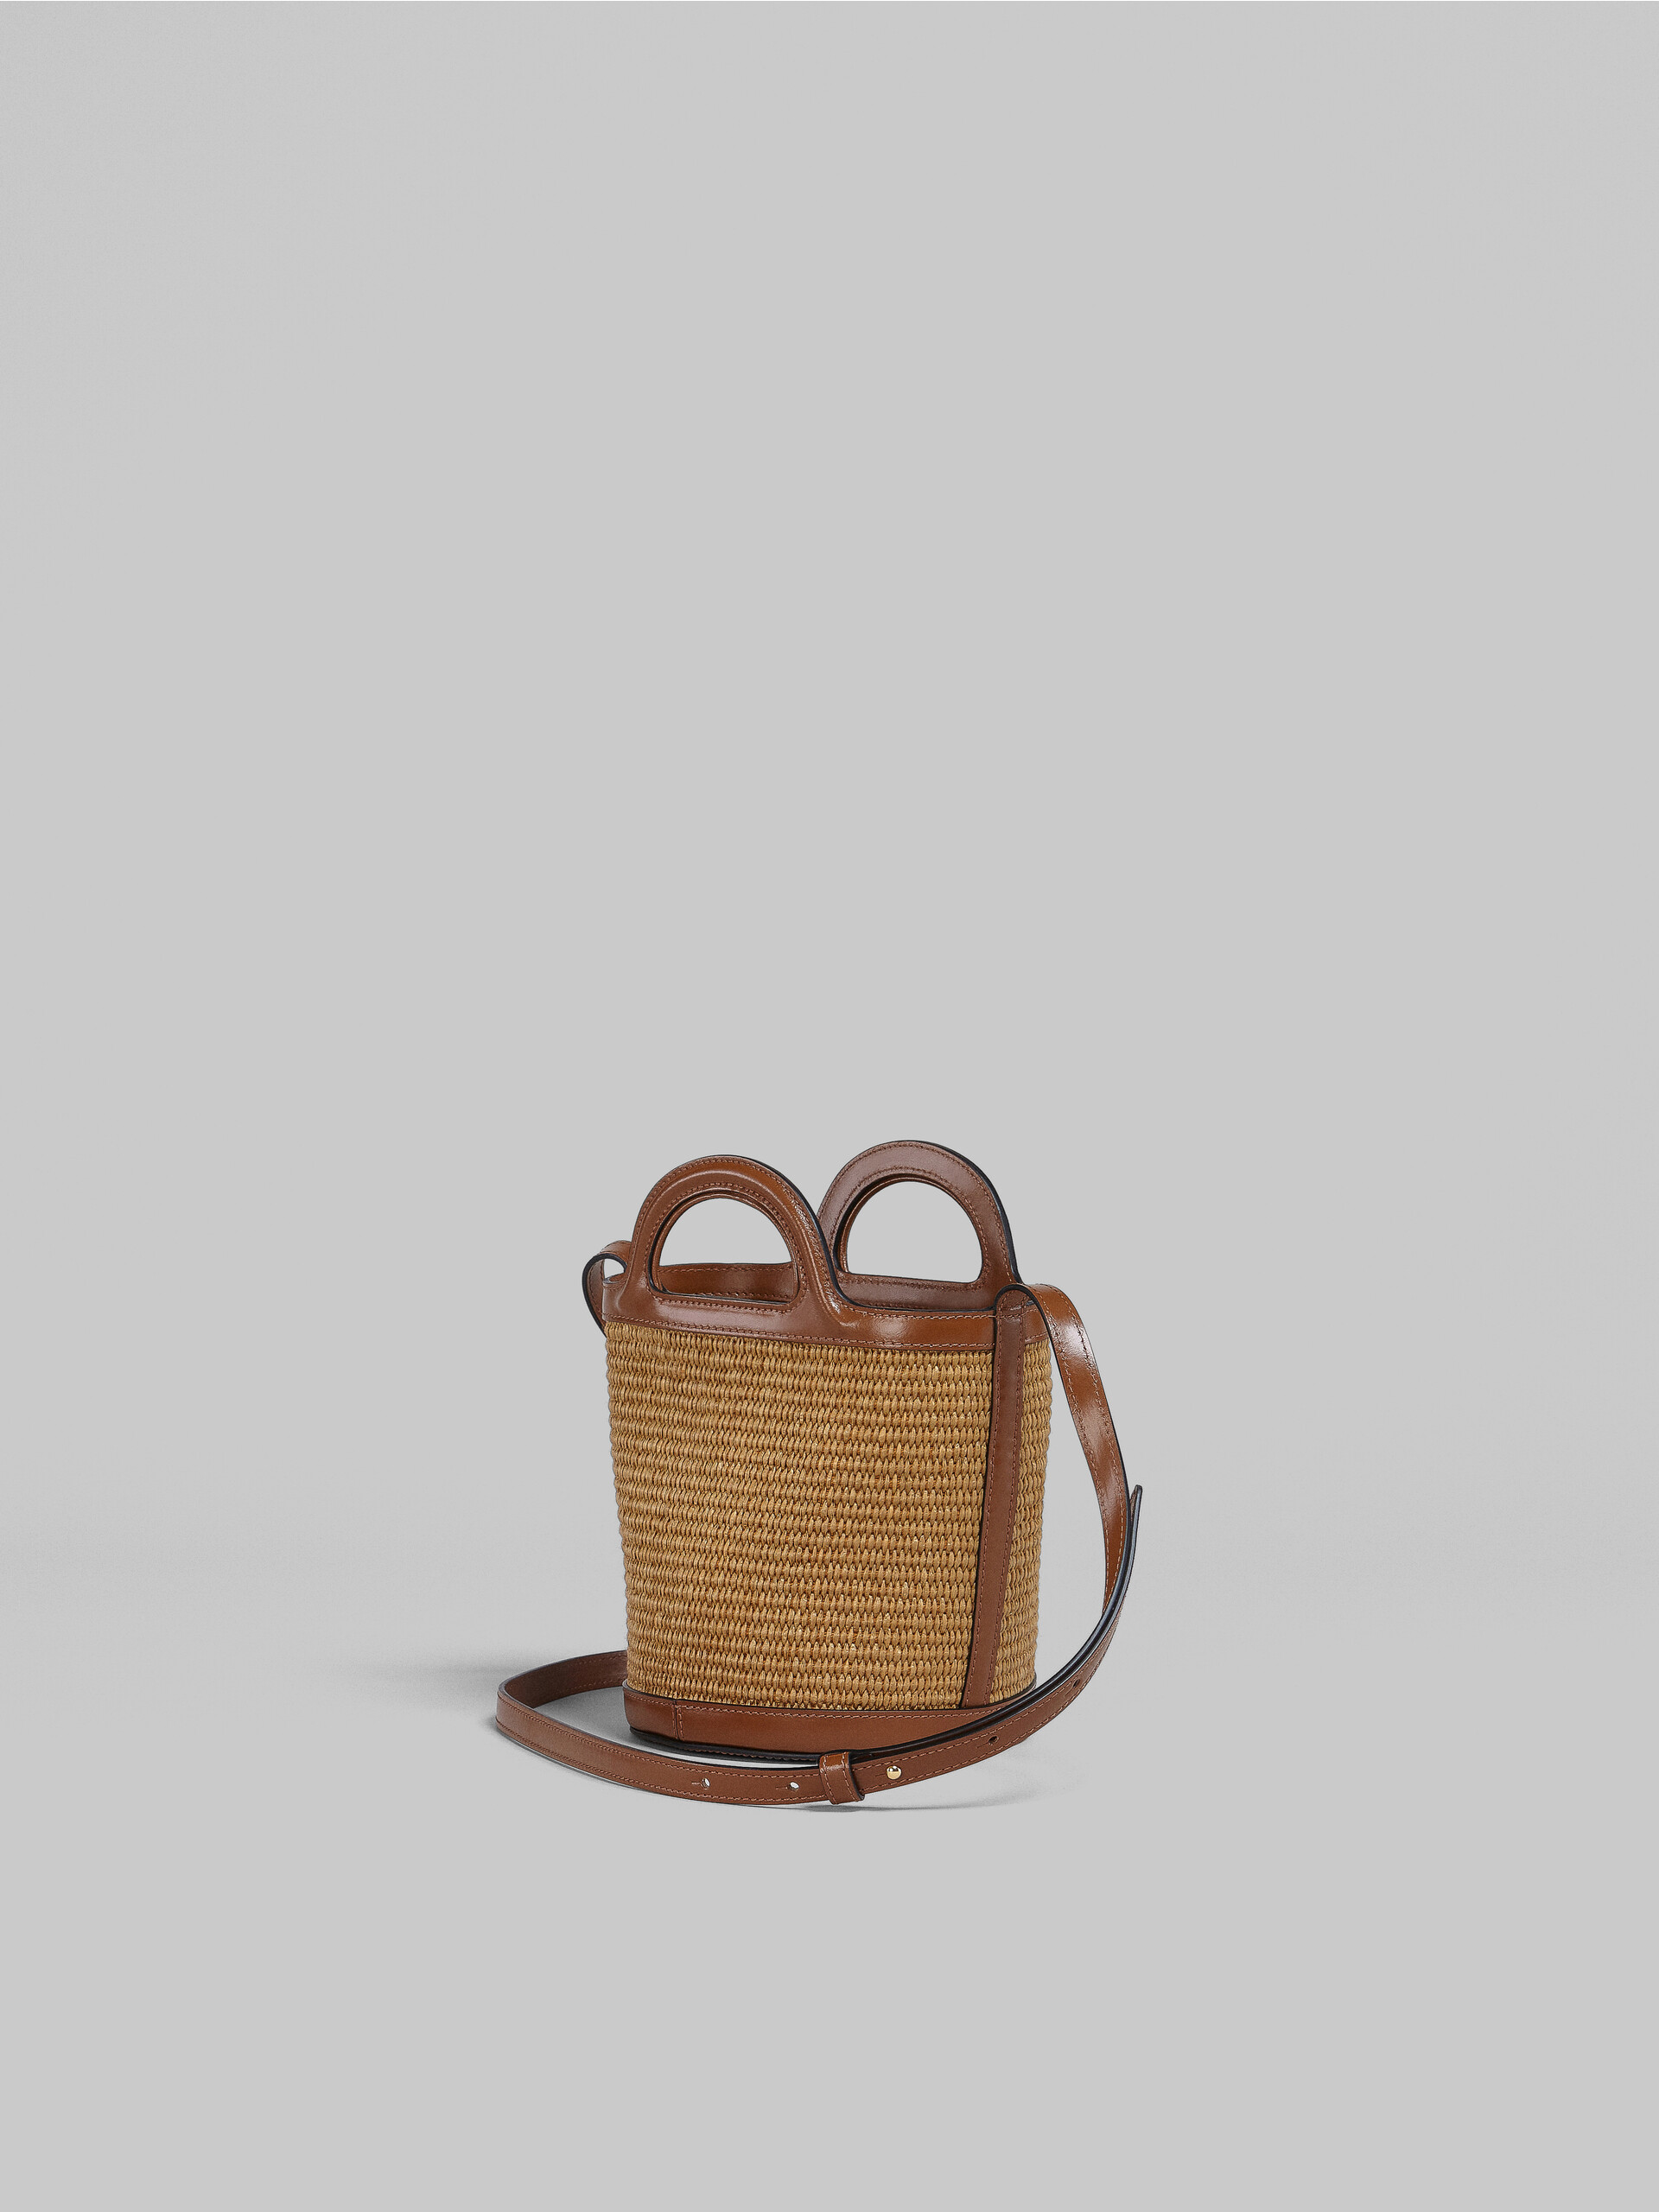 Tropicalia Small Bucket Bag in brown leather and raffia - Shoulder Bag - Image 3